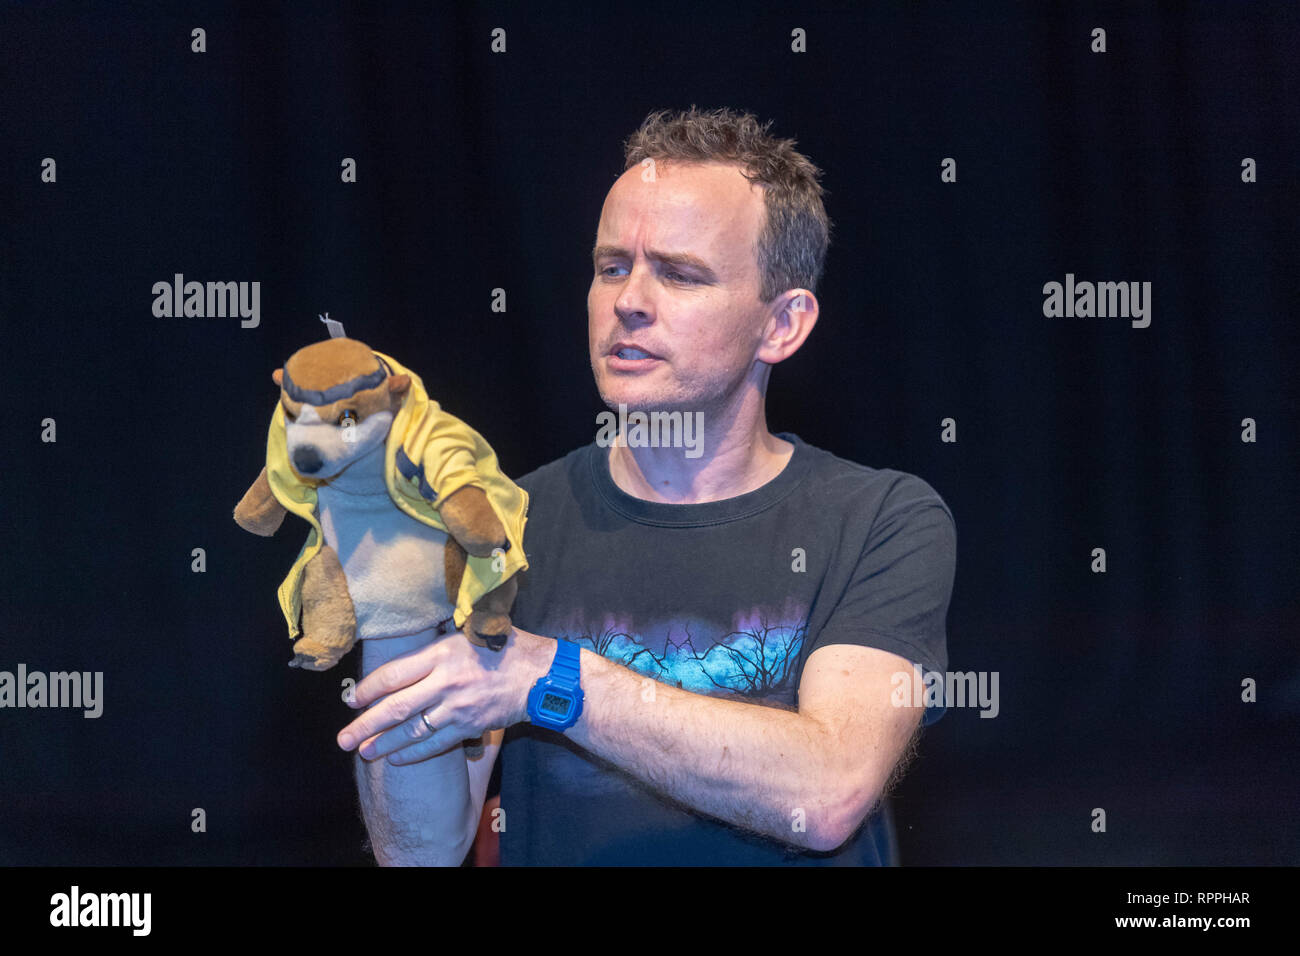 Brentwood, Essex, UK. 22nd February 2019. Half term literary activities for children with award winning children's authors Michelle Harrison and Gareth P Jones Gareth P Jones entertains children with a glove puppet of his book character the Ninja Meerkat, Credit: Ian Davidson/Alamy Live News Stock Photo